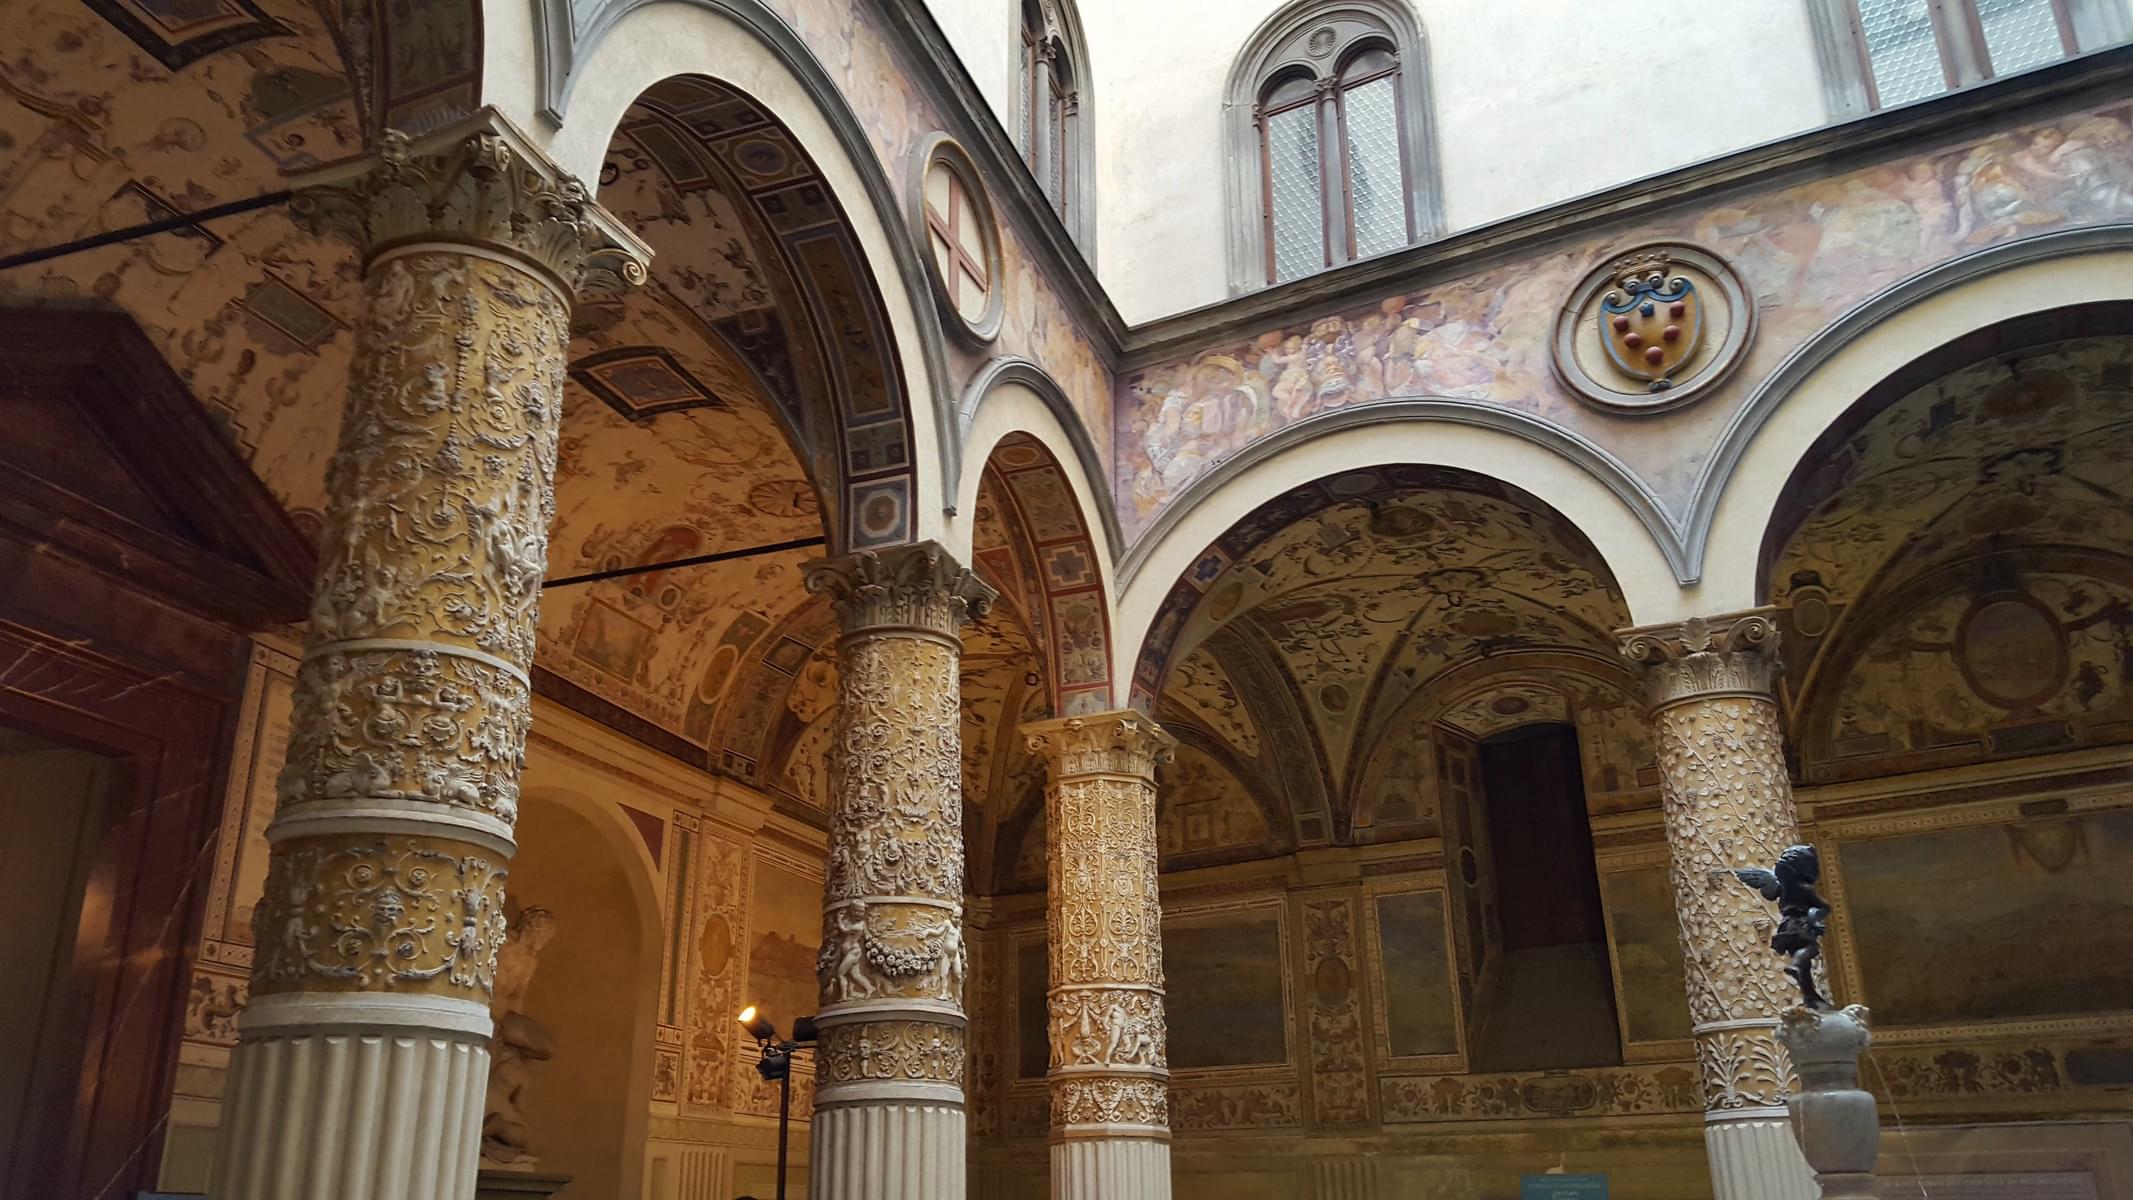 Some interesting facts about Palazzo Vecchio